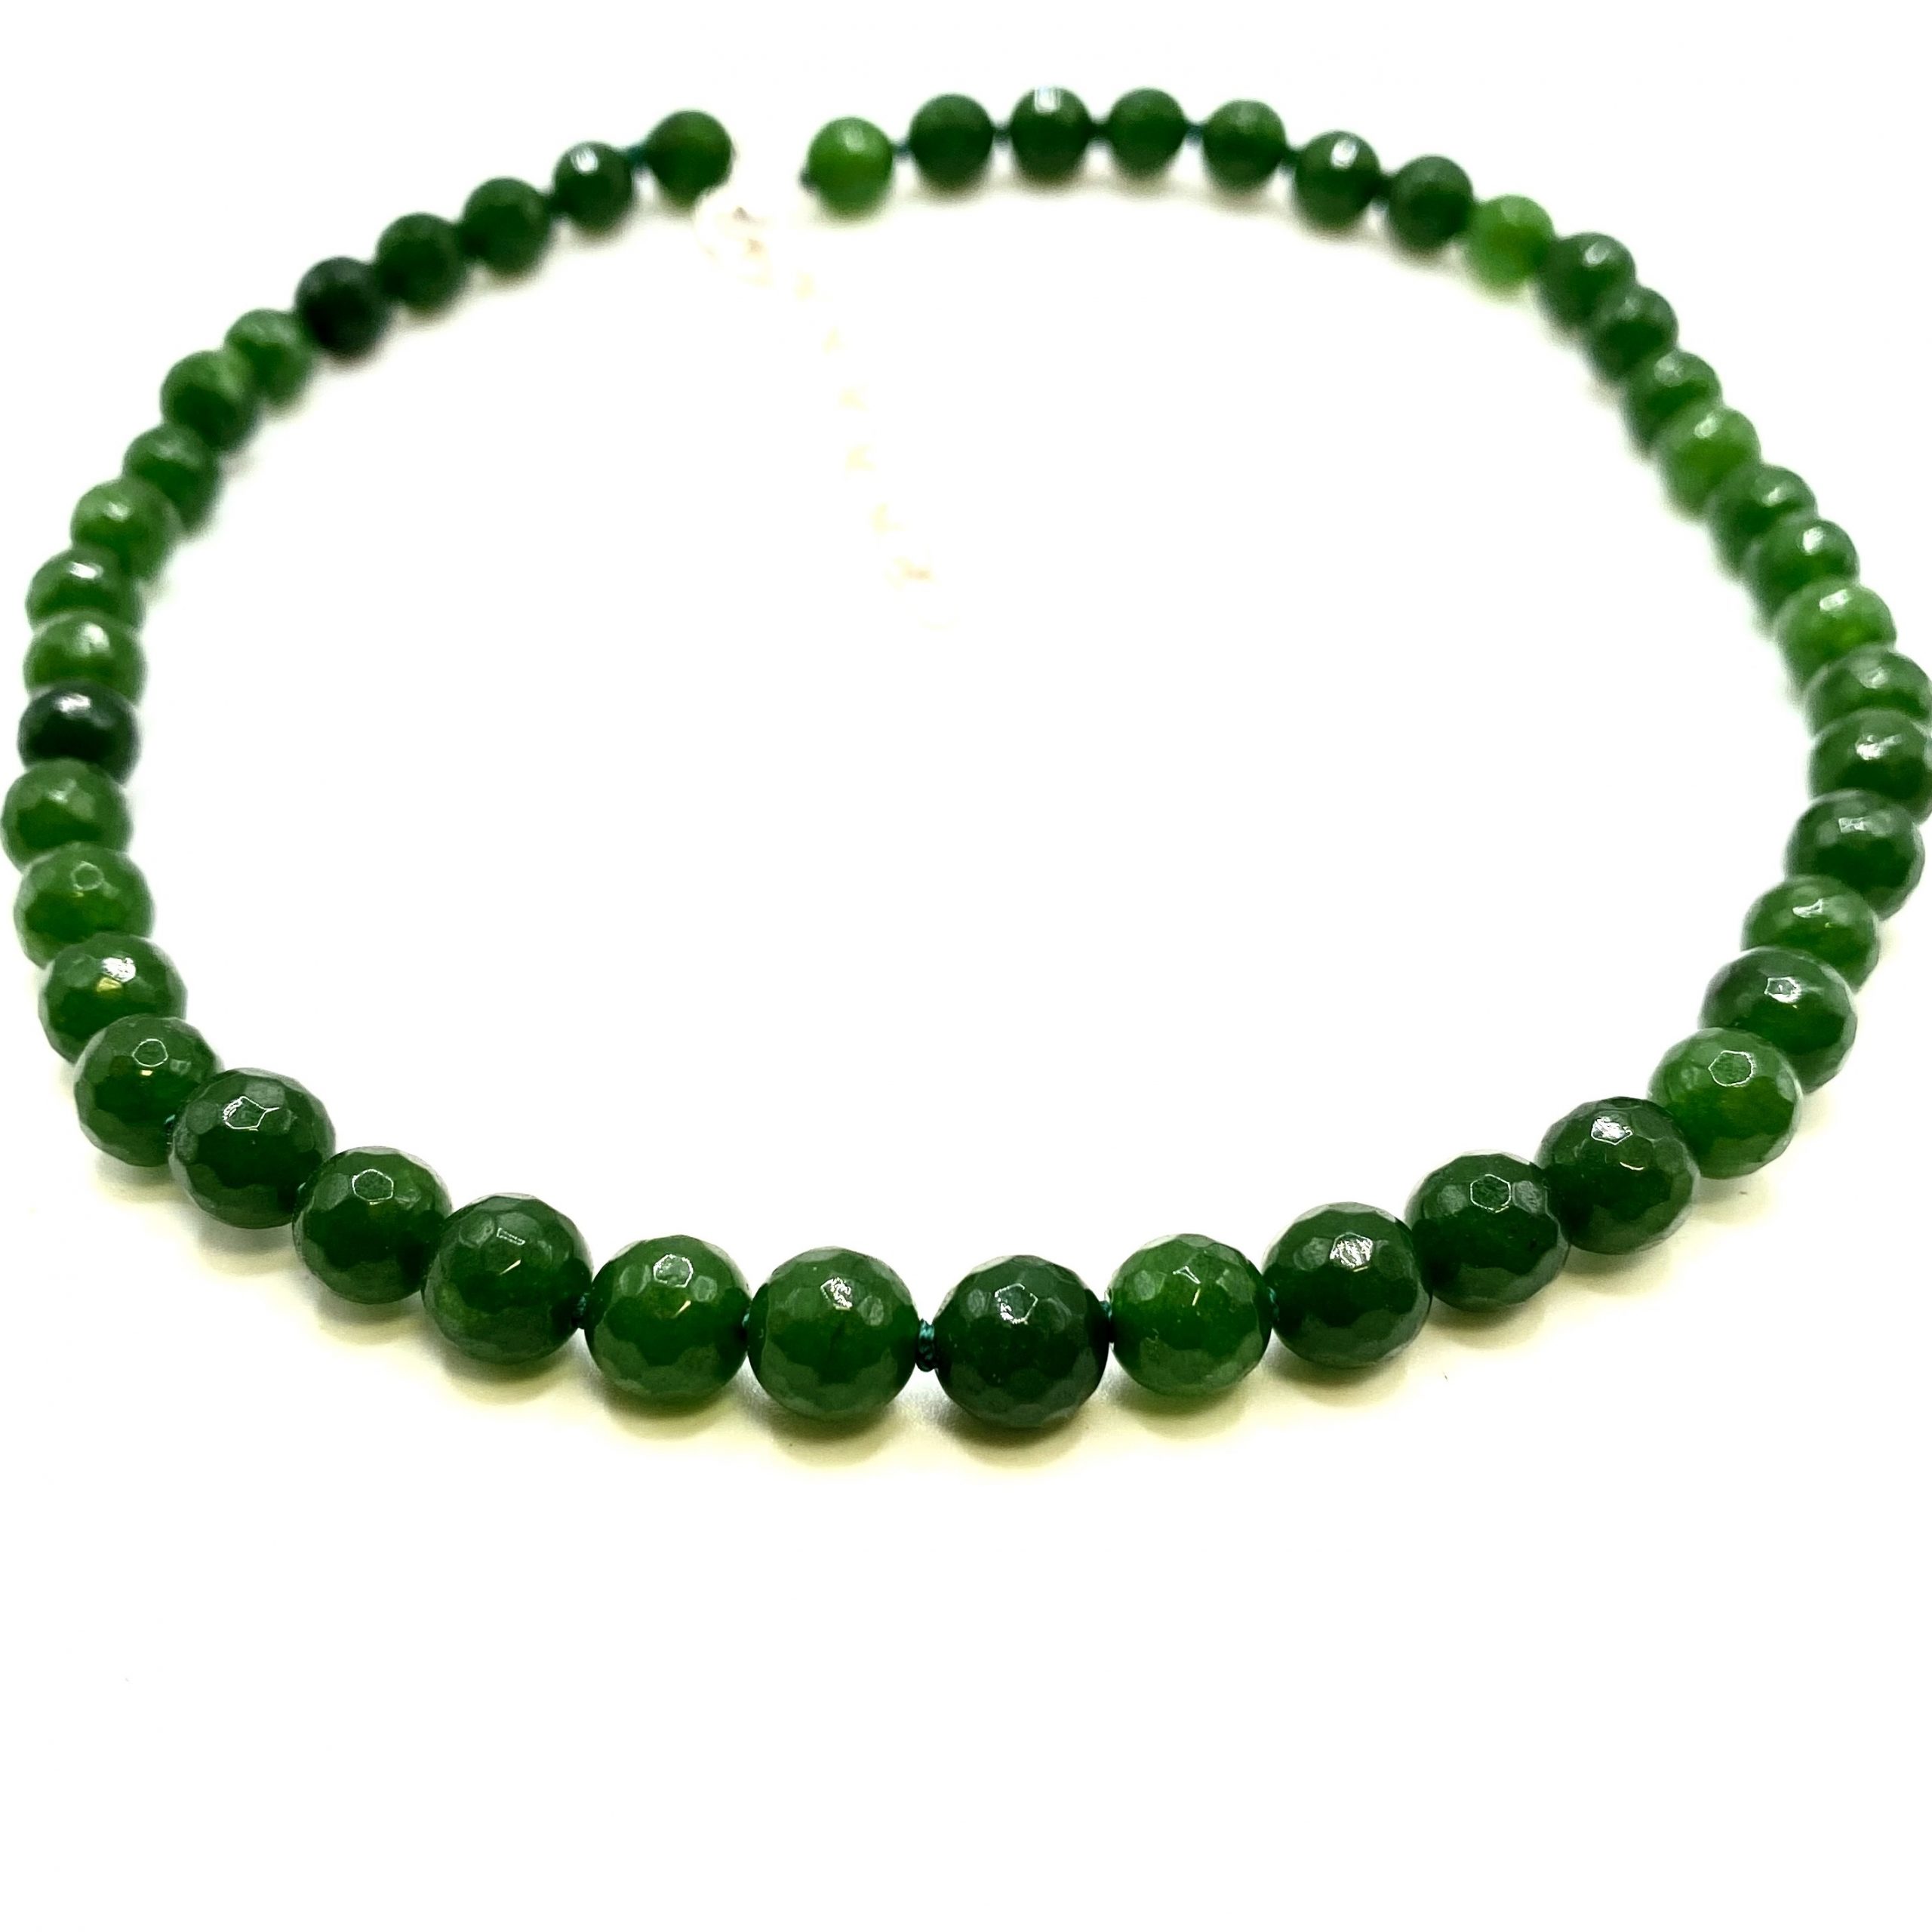 Deep green round faceted jade stone necklace